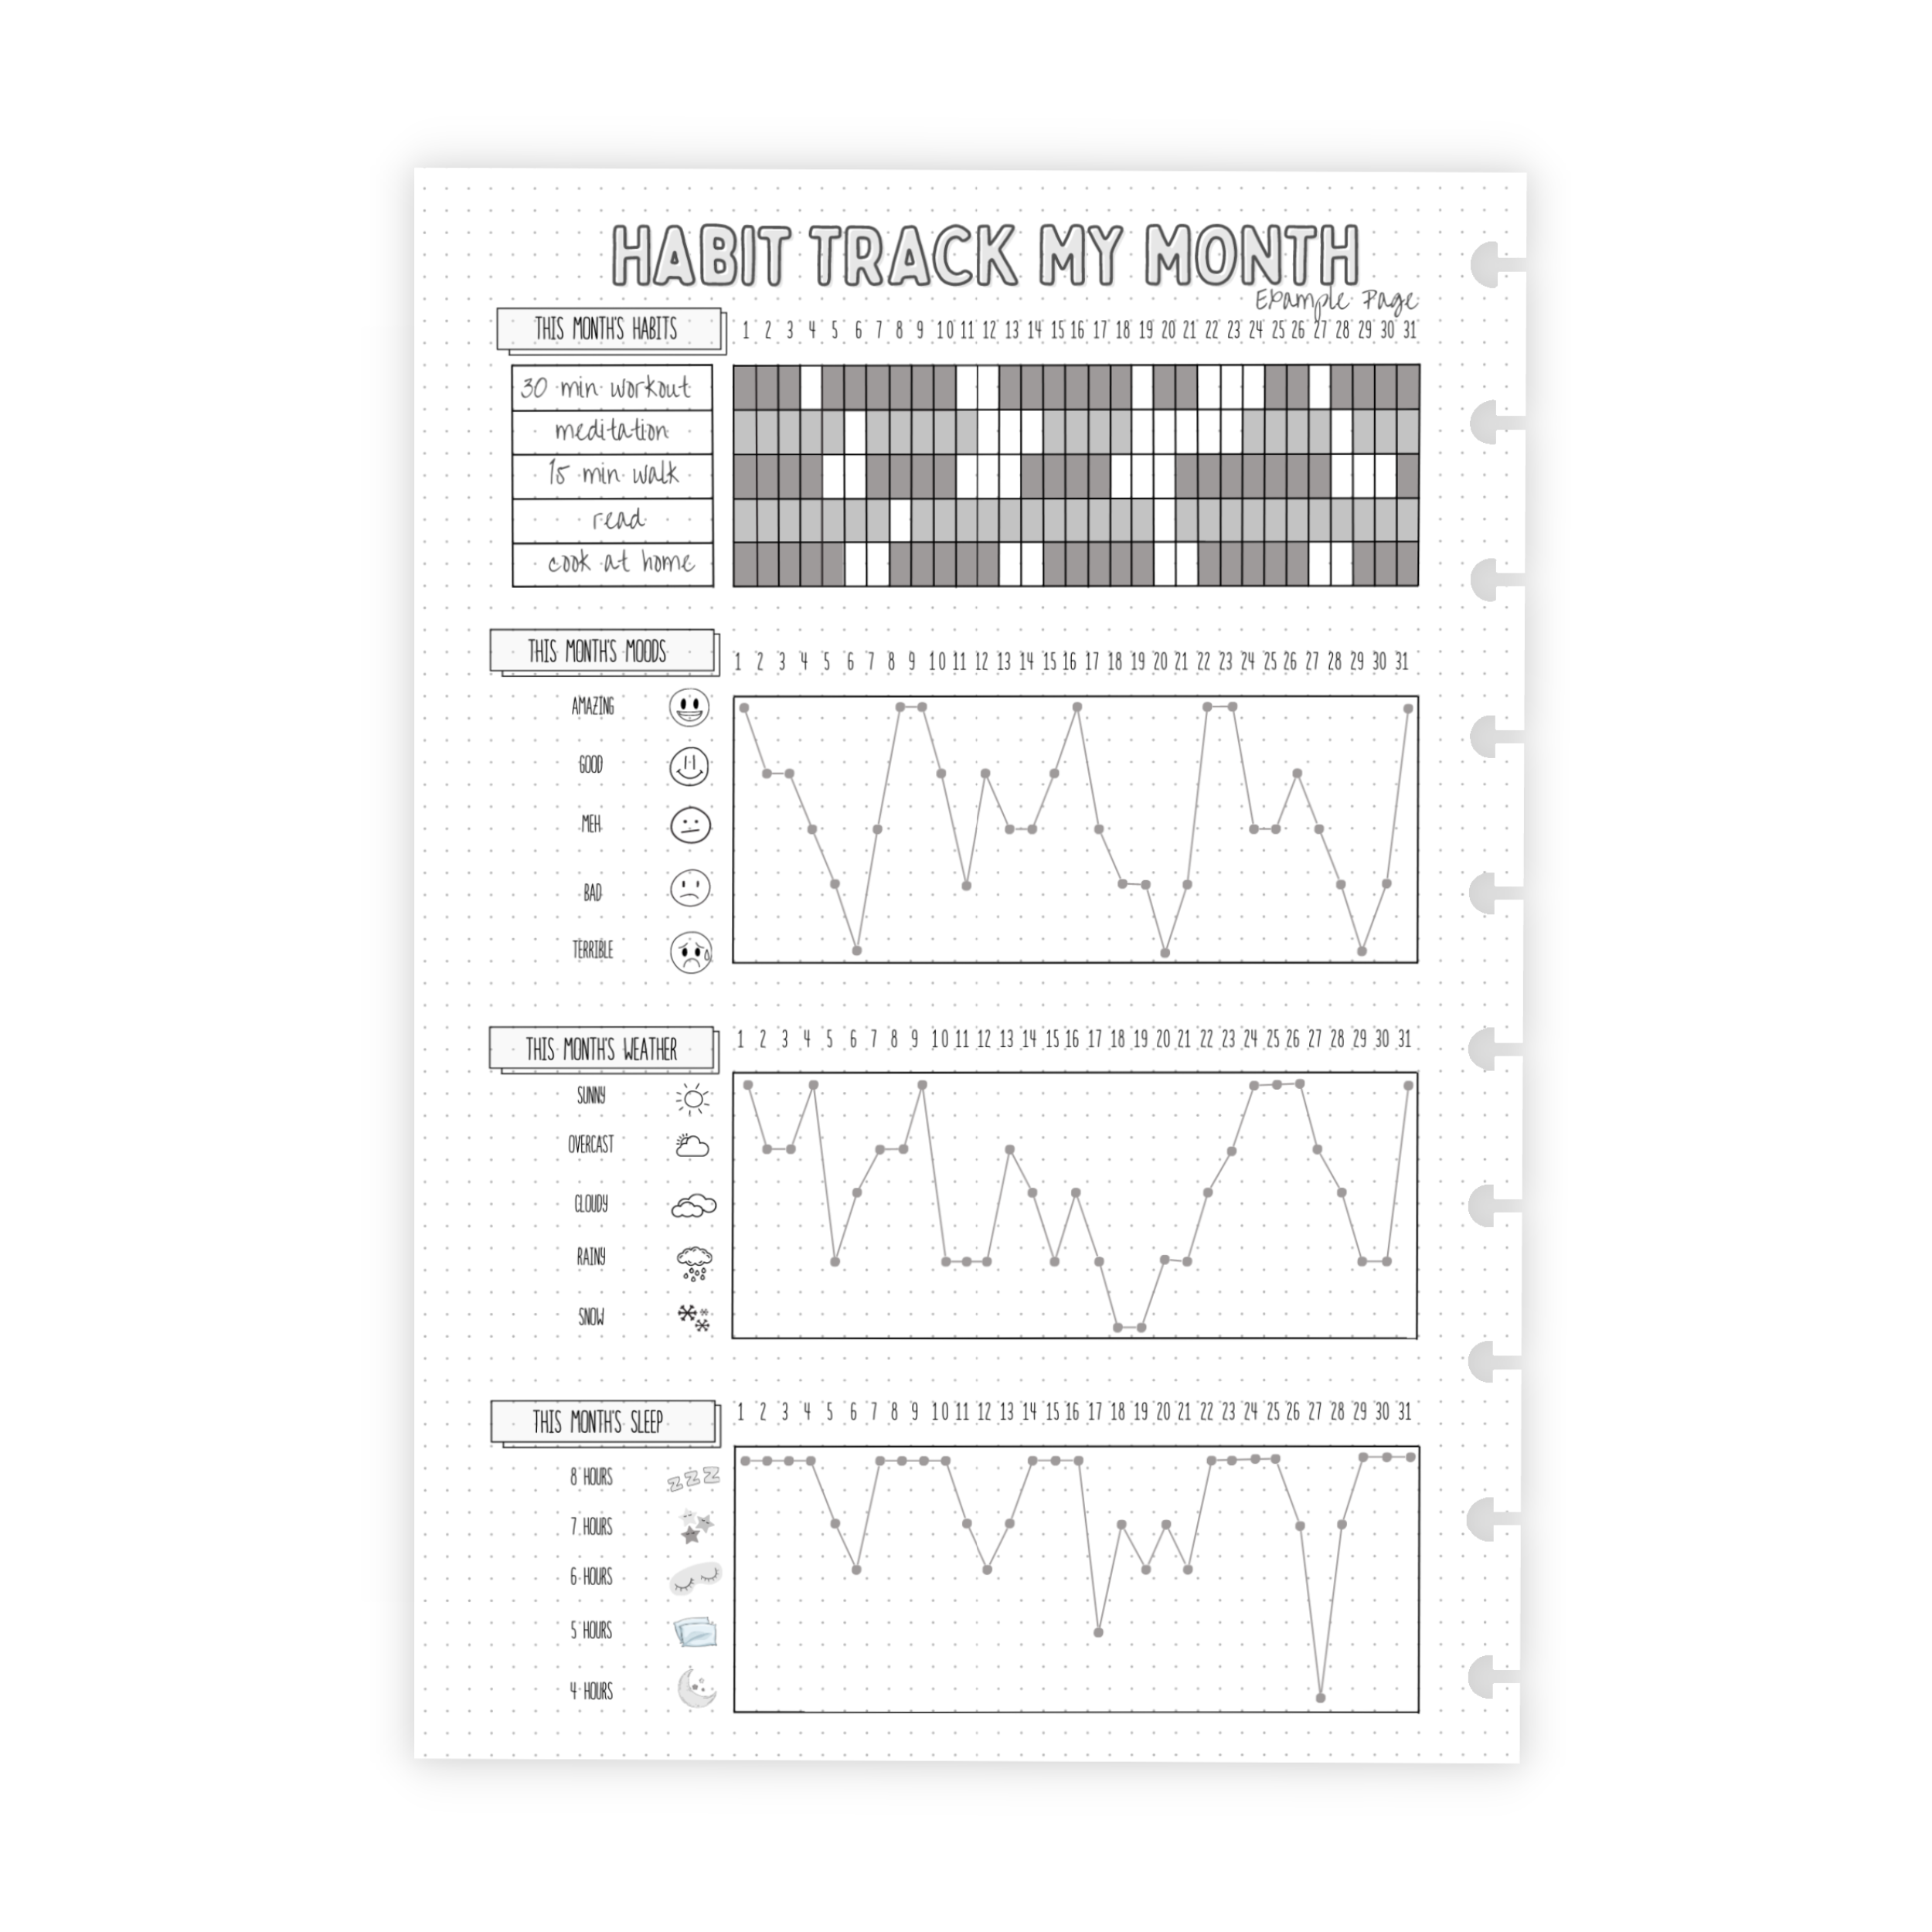 &quot;Habit Track My Month&quot; example page